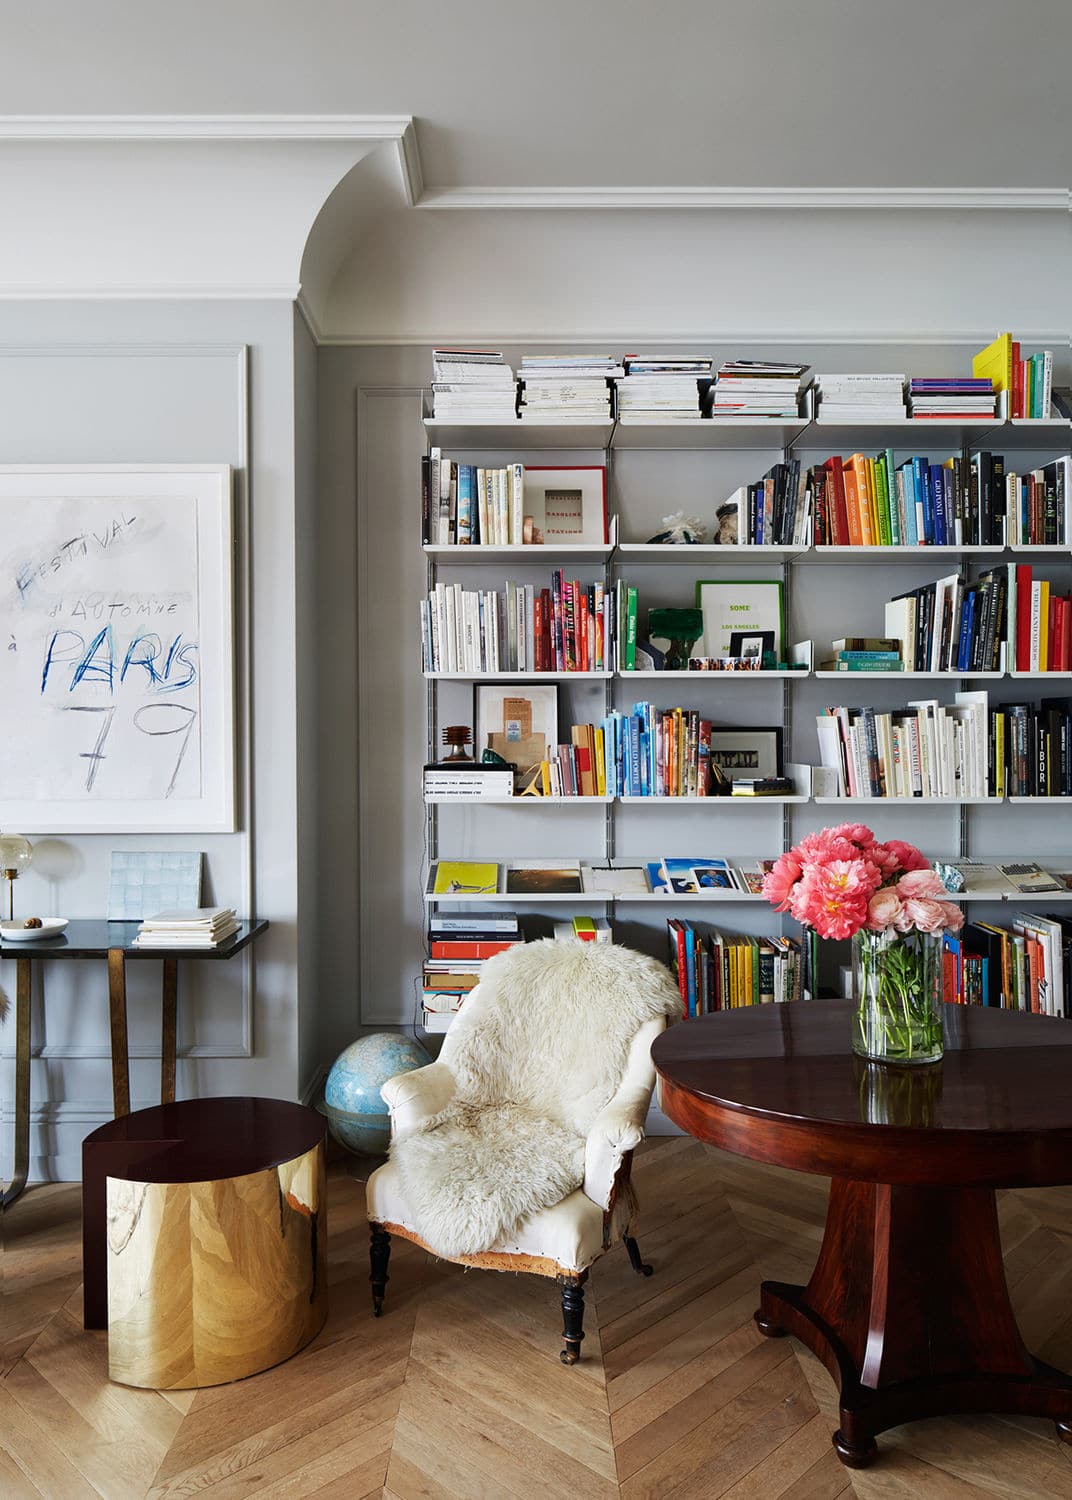 a cozy eclectic corner in the living room | jenna lyons house tour on coco kelley